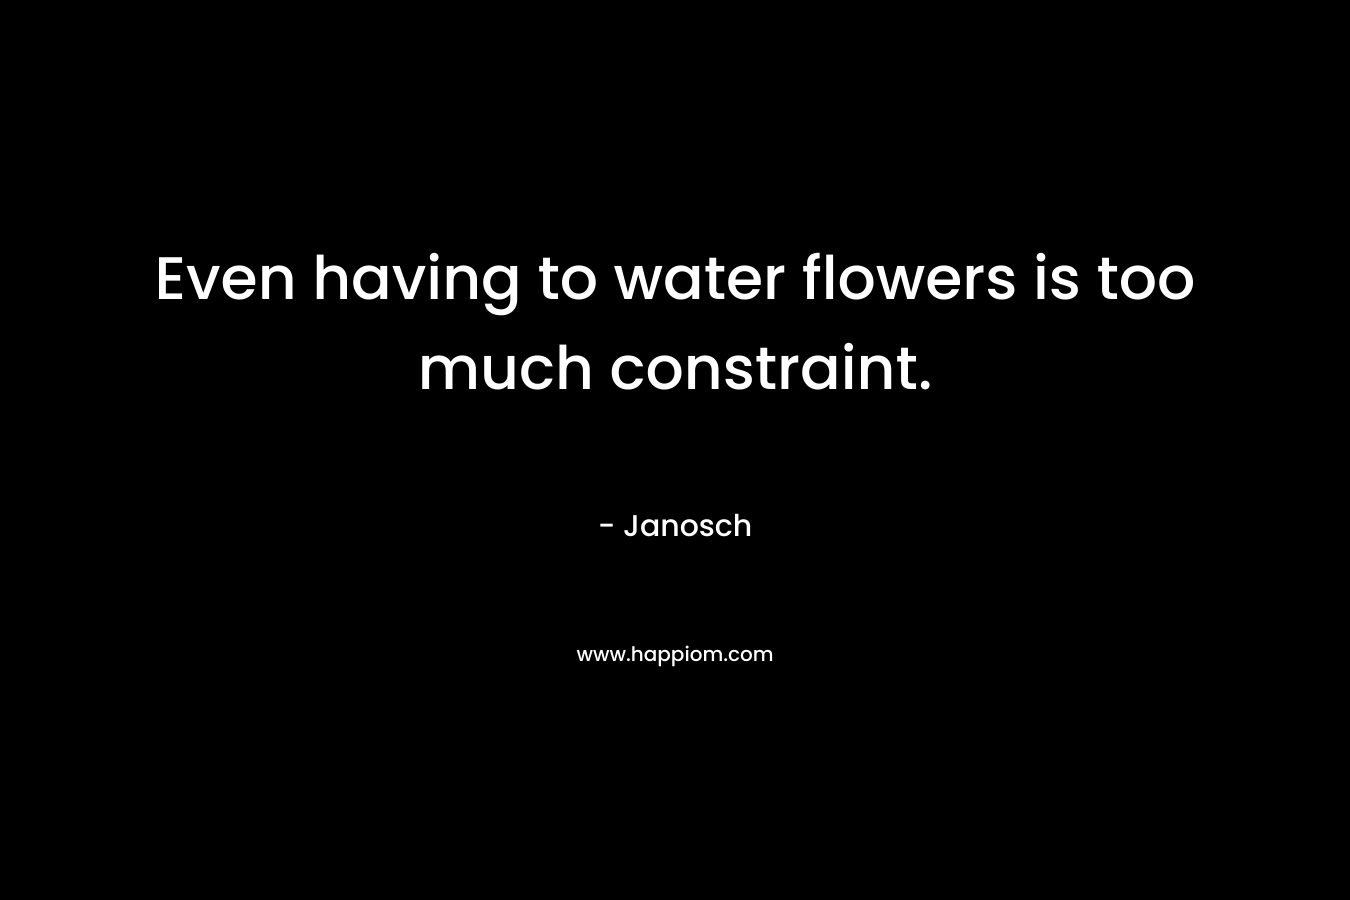 Even having to water flowers is too much constraint.